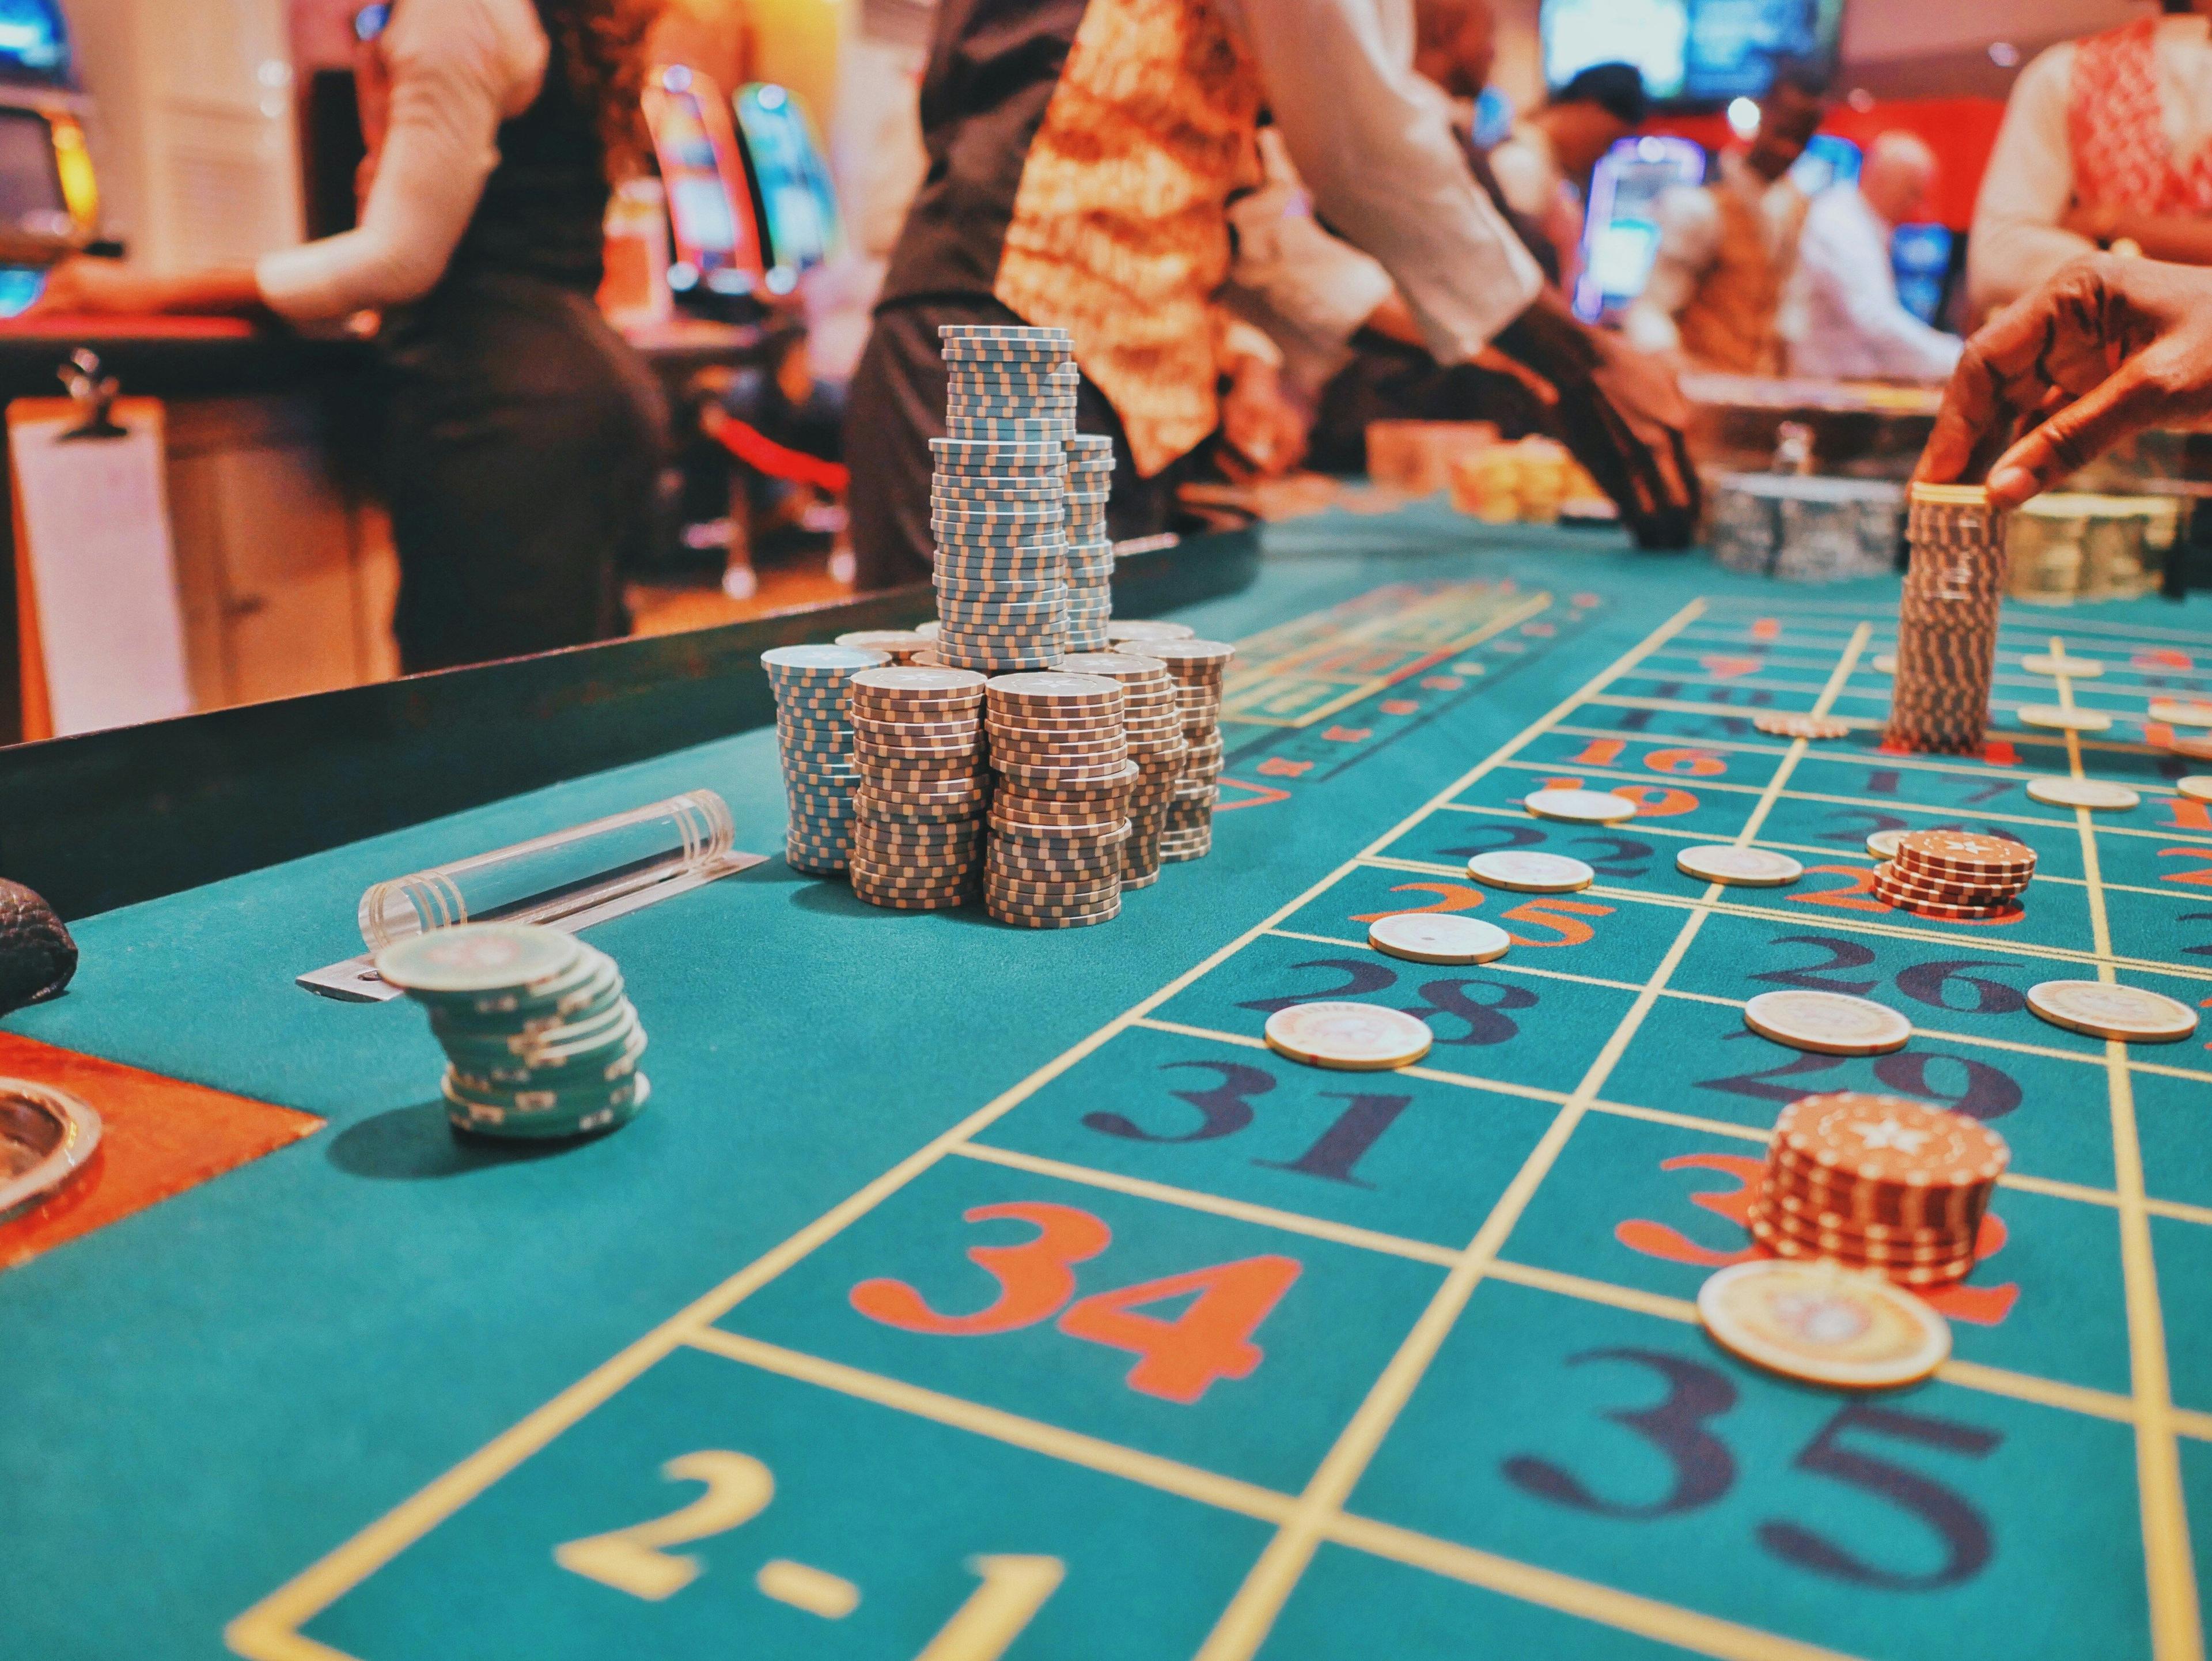 New casinos: 5 good reasons to discover new online casinos